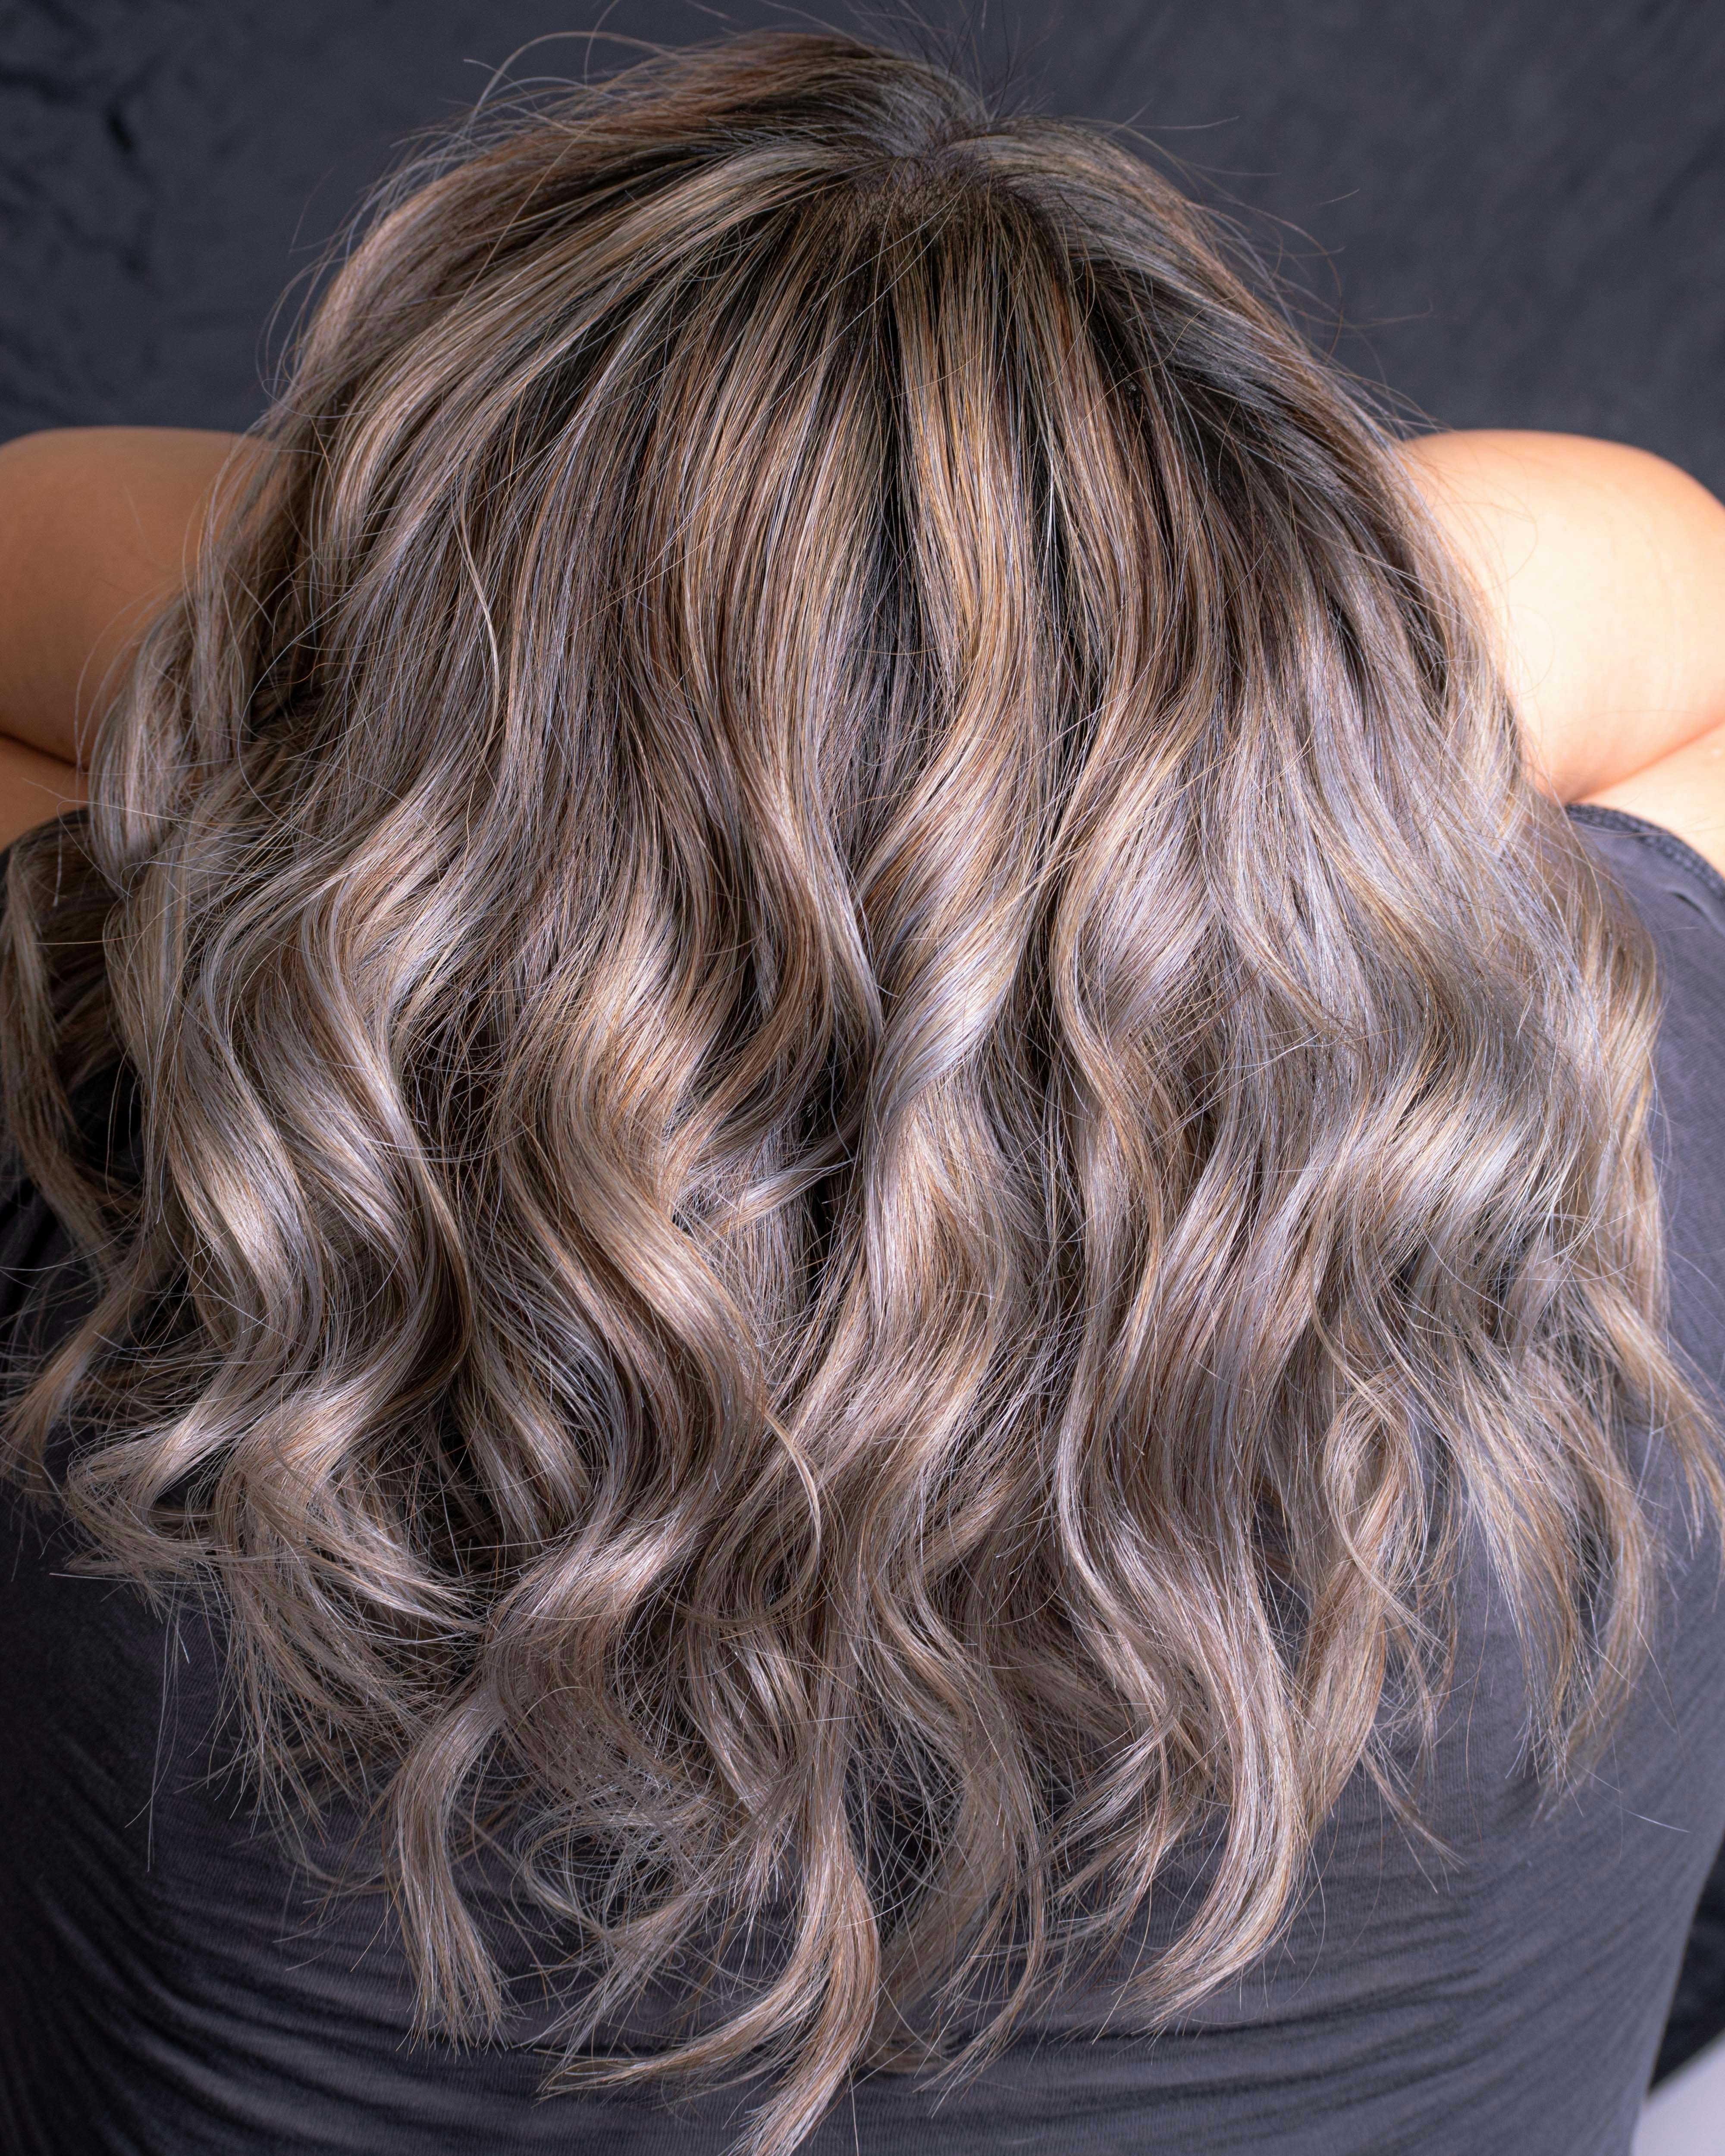 How Can I Avoid Crimp Marks When Using A Curling Iron?